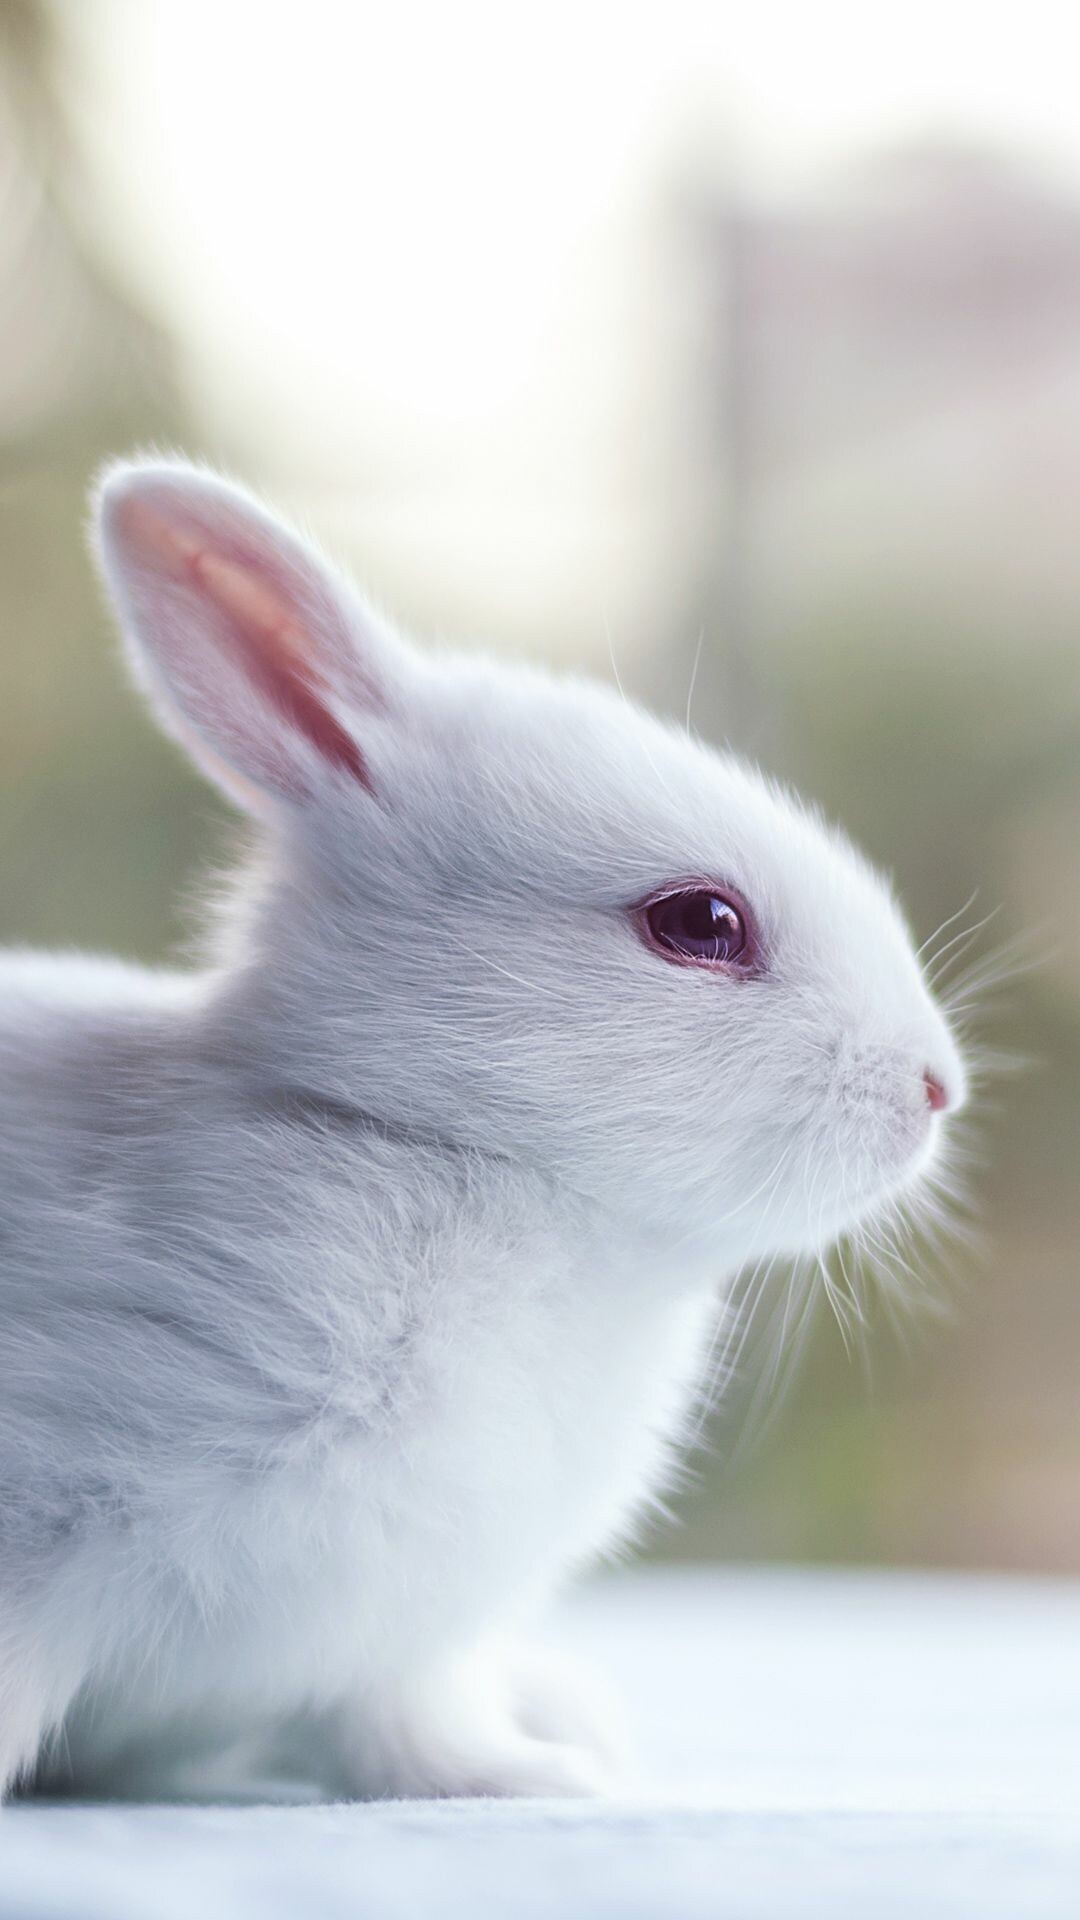 Rabbit: A small furry animal with long ears. 1080x1920 Full HD Background.